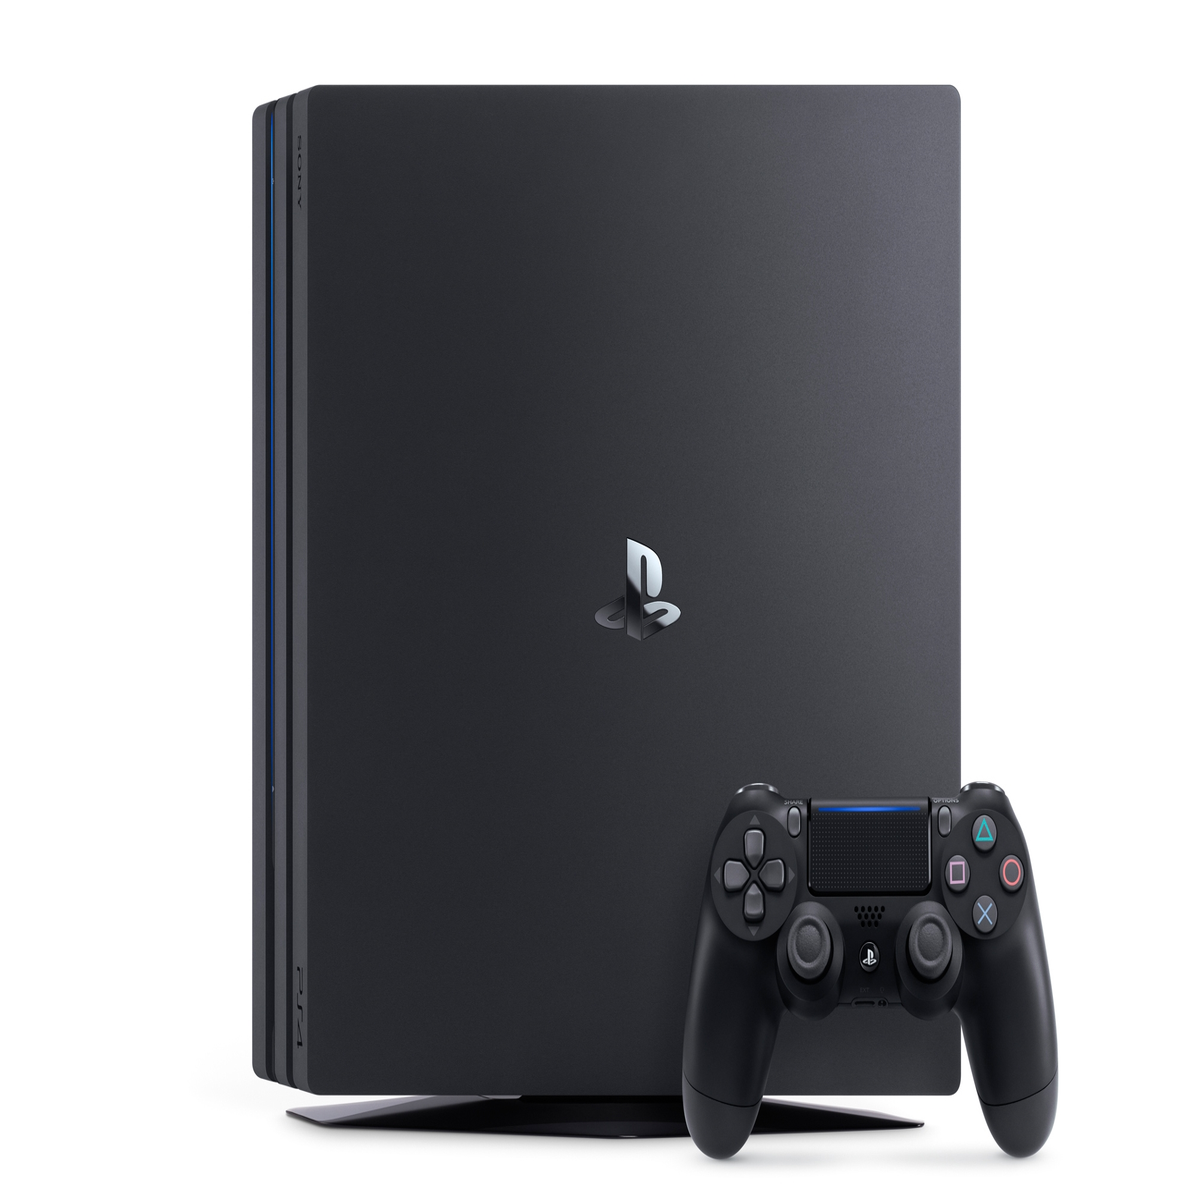 PS4 European pre-orders not guaranteed after August 6